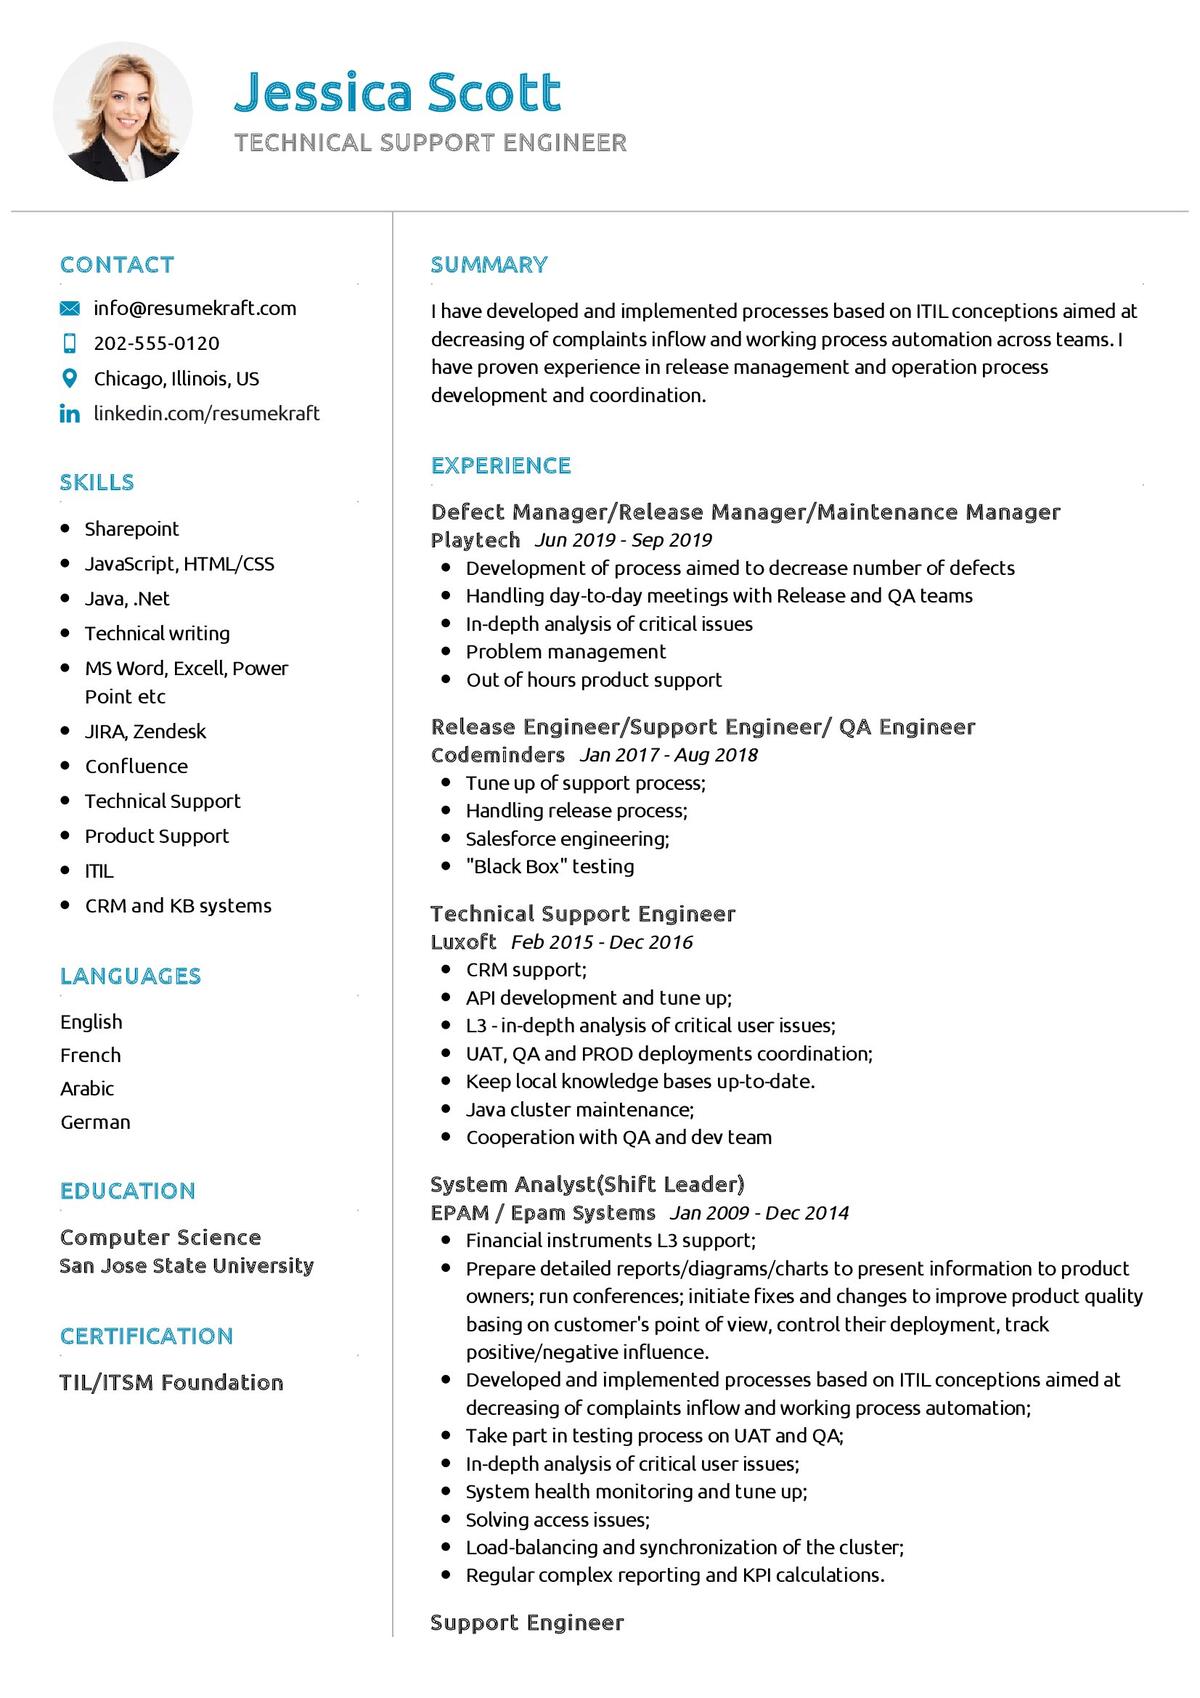 technical support engineer resume for fresher